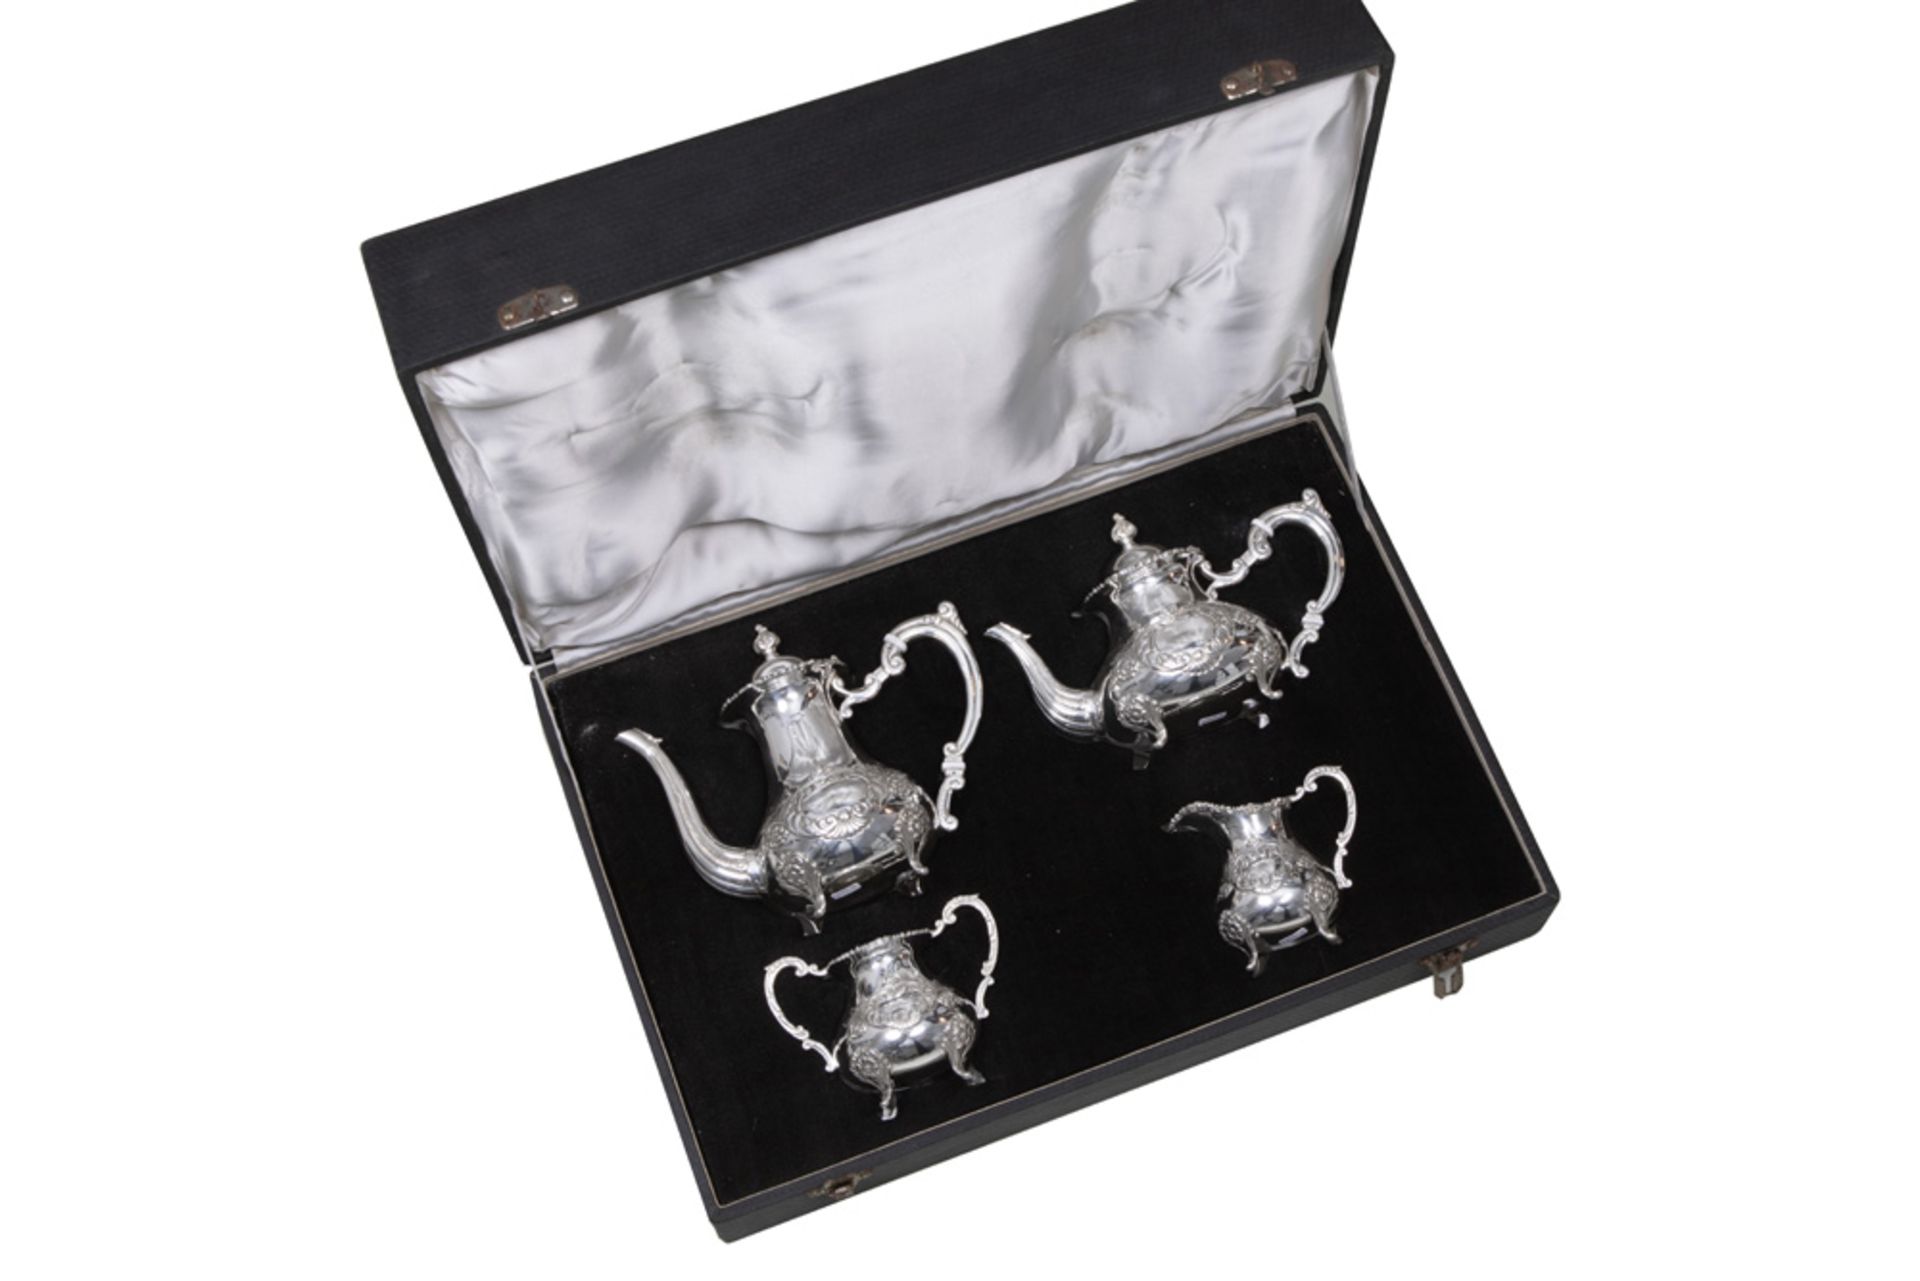 4pc coffee and teaset in silver - with its case || Vierdelig koffie- en theestel in massief zilver - - Image 3 of 4